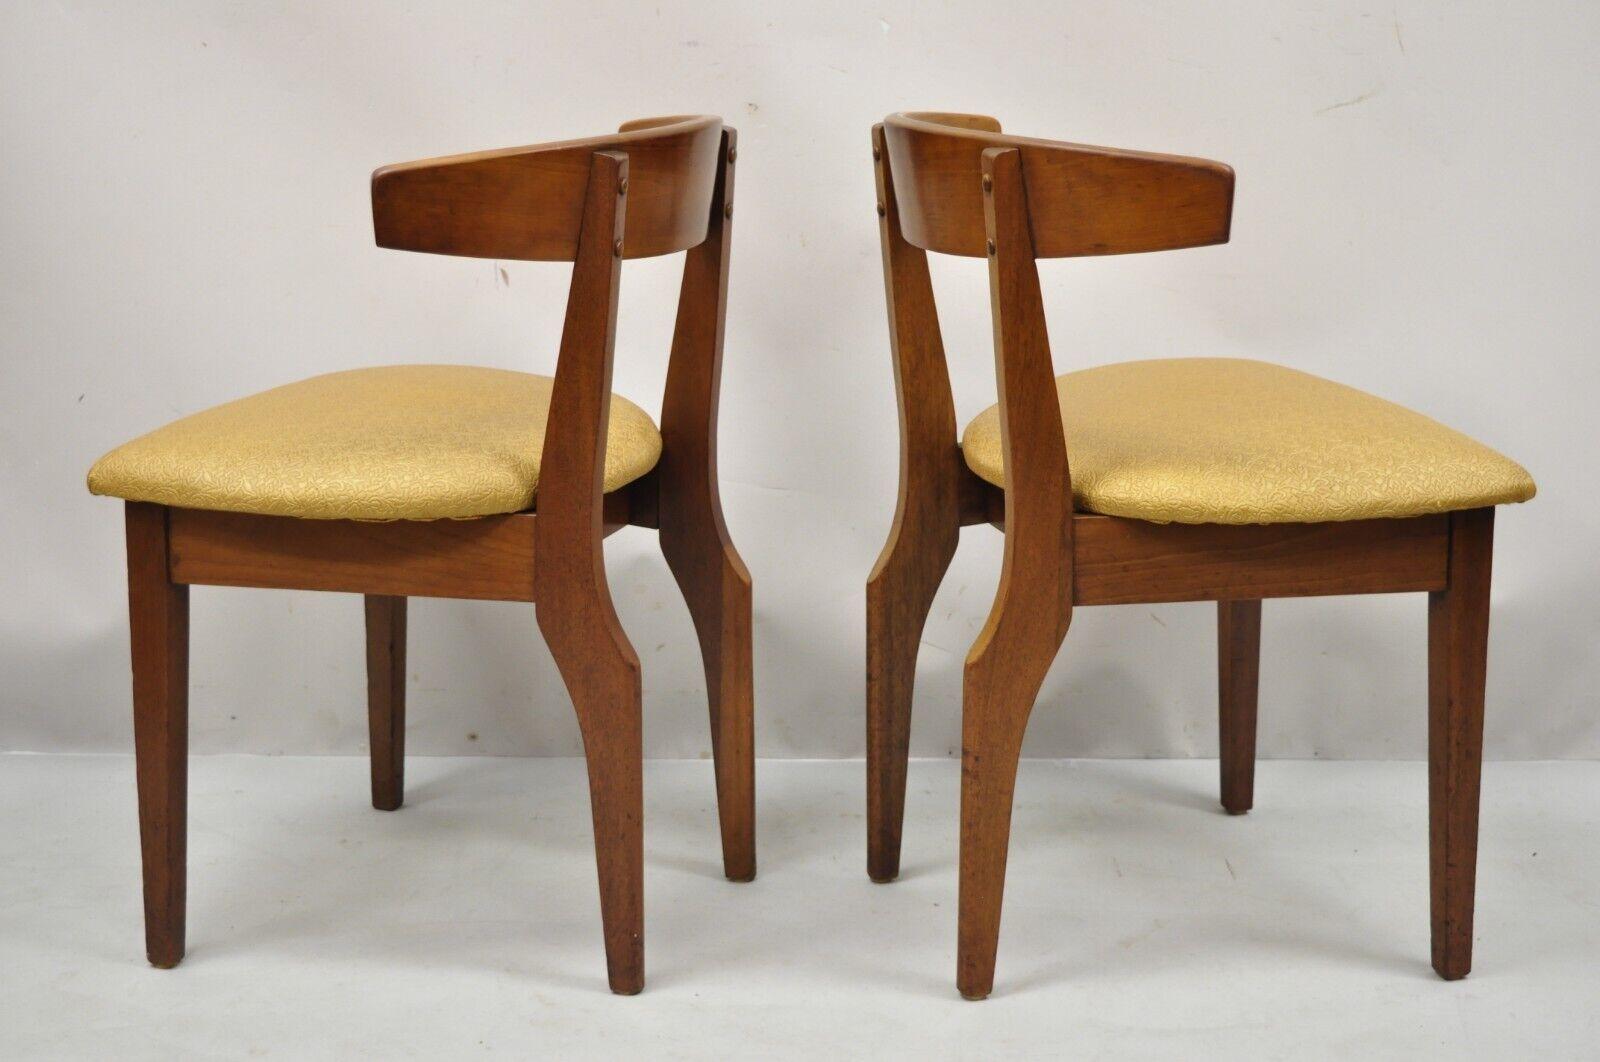 American Mid-Century Modern Cherry Wood Curved Back Hoof Leg Side Chair, a Pair For Sale